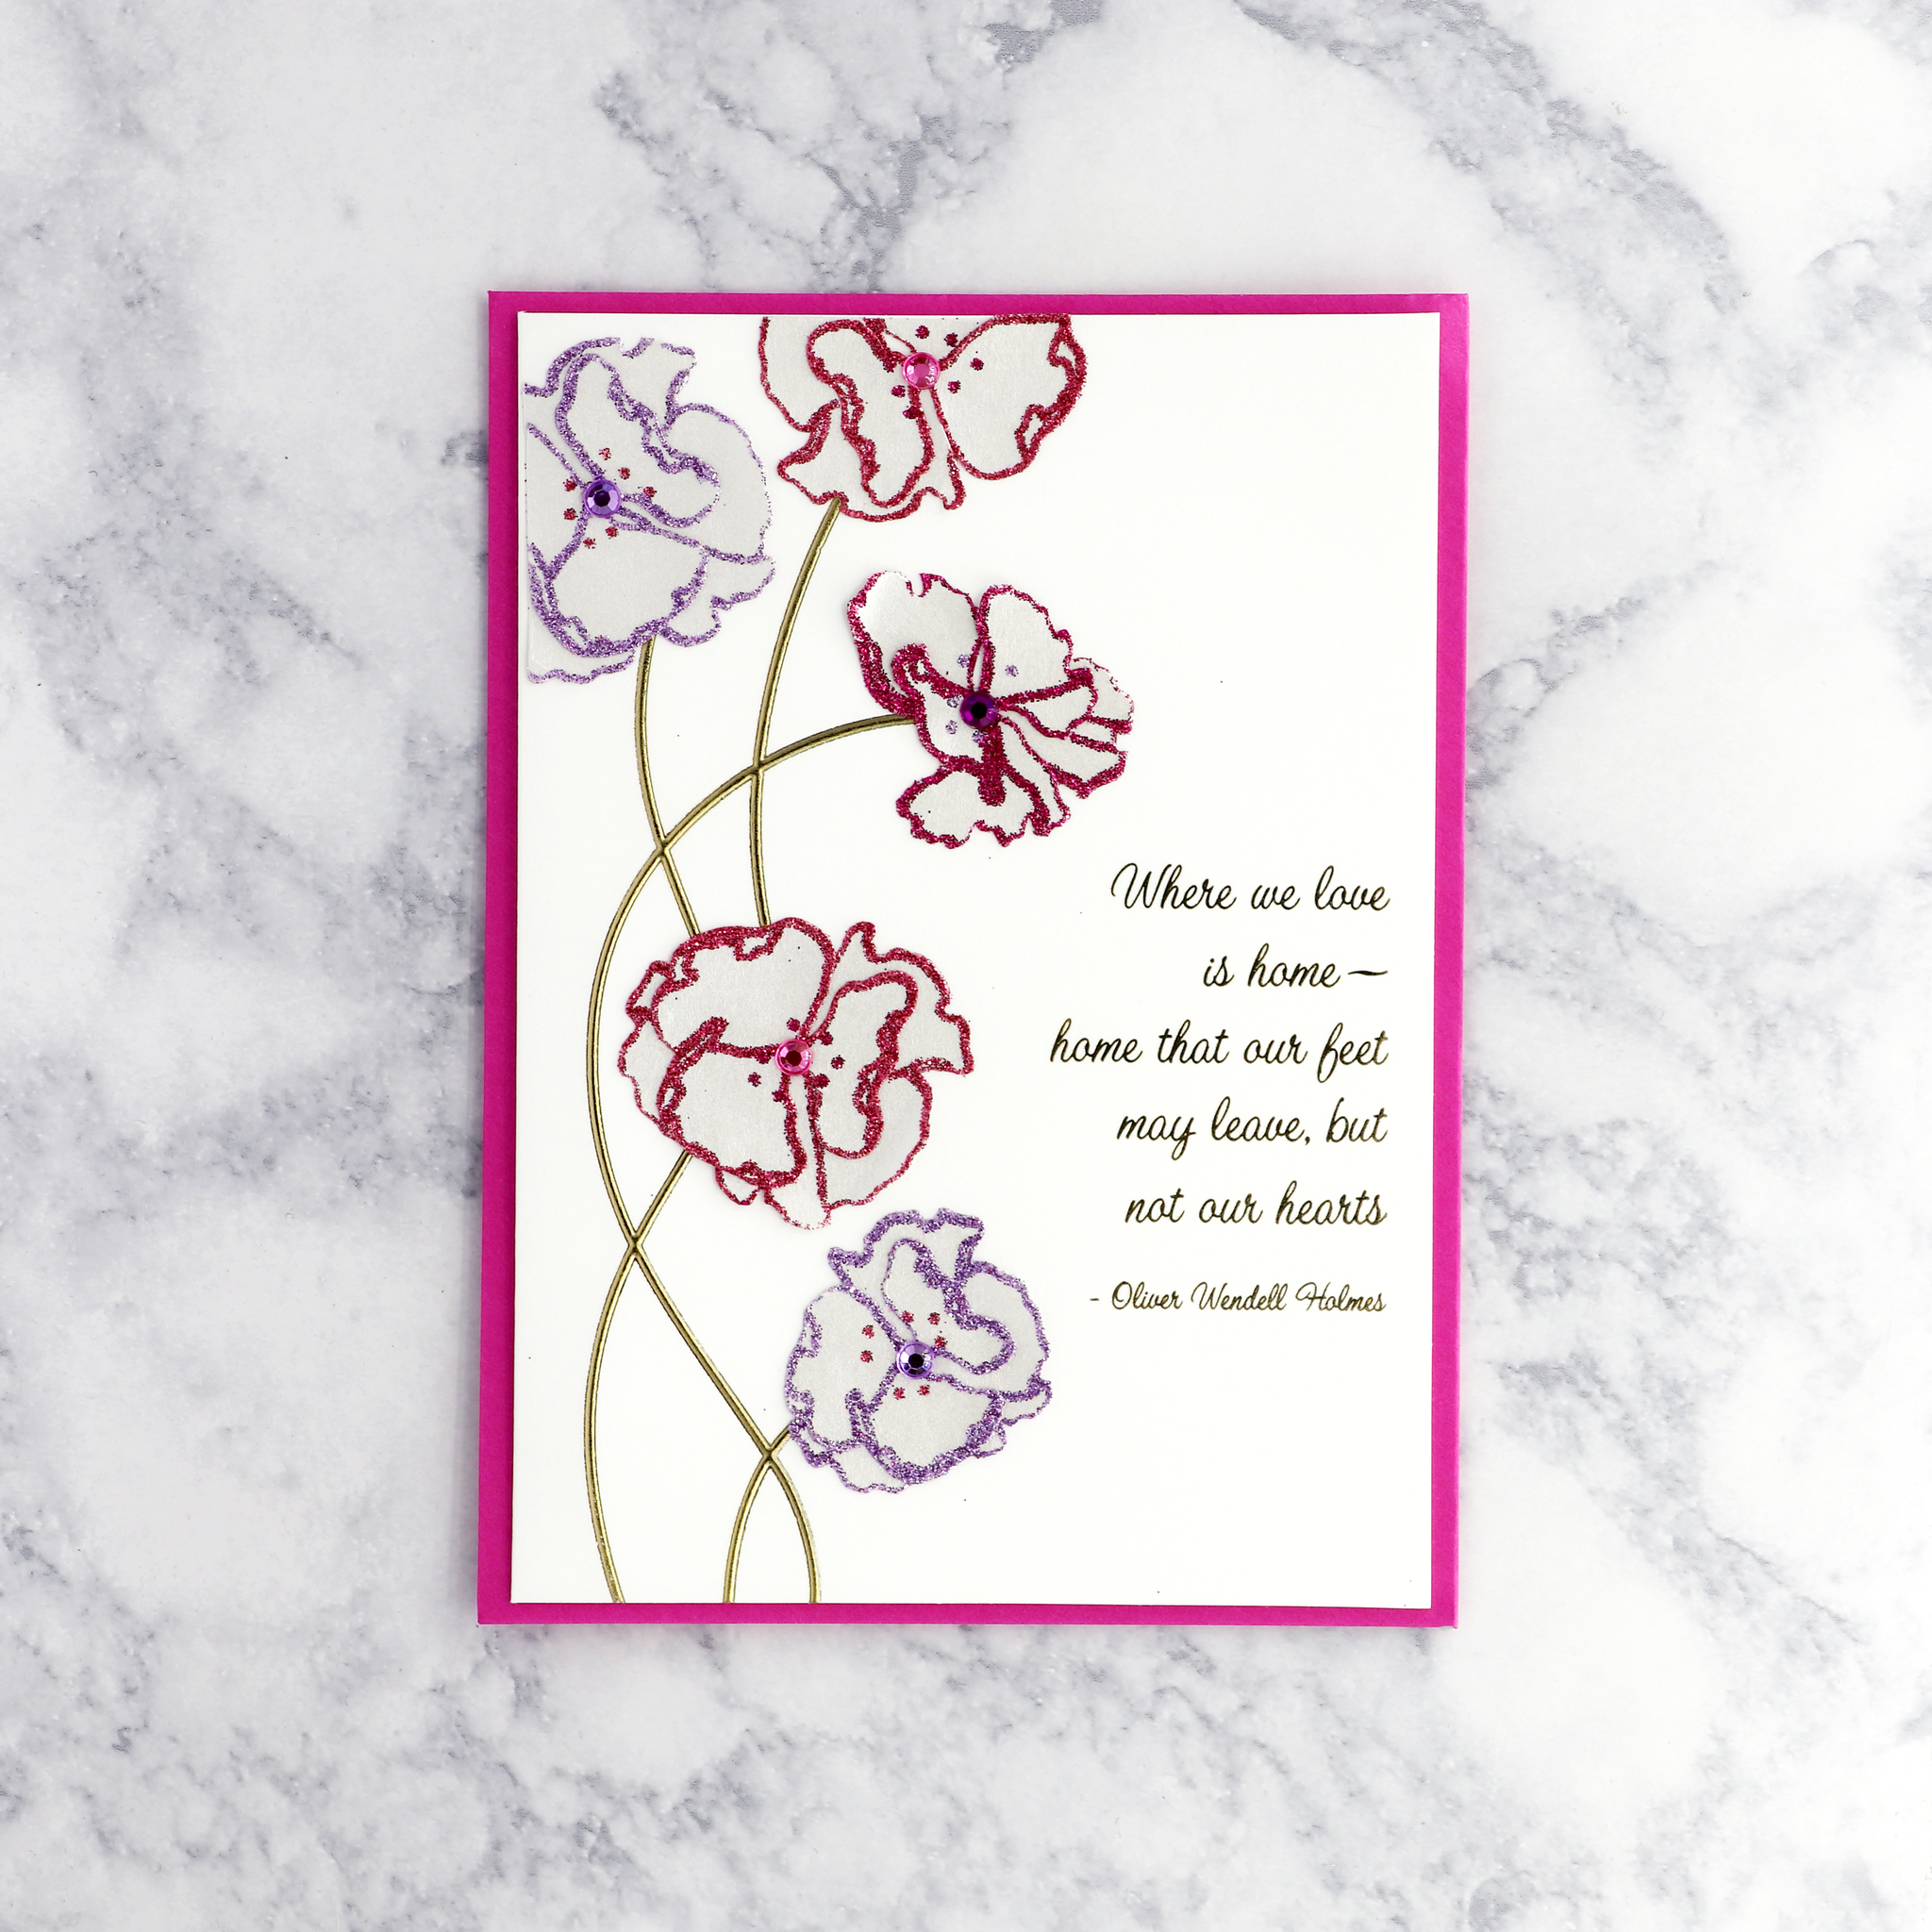 Glittered Flowers Oliver Wendell Holmes Quote Mother's Day Card (For Mom)